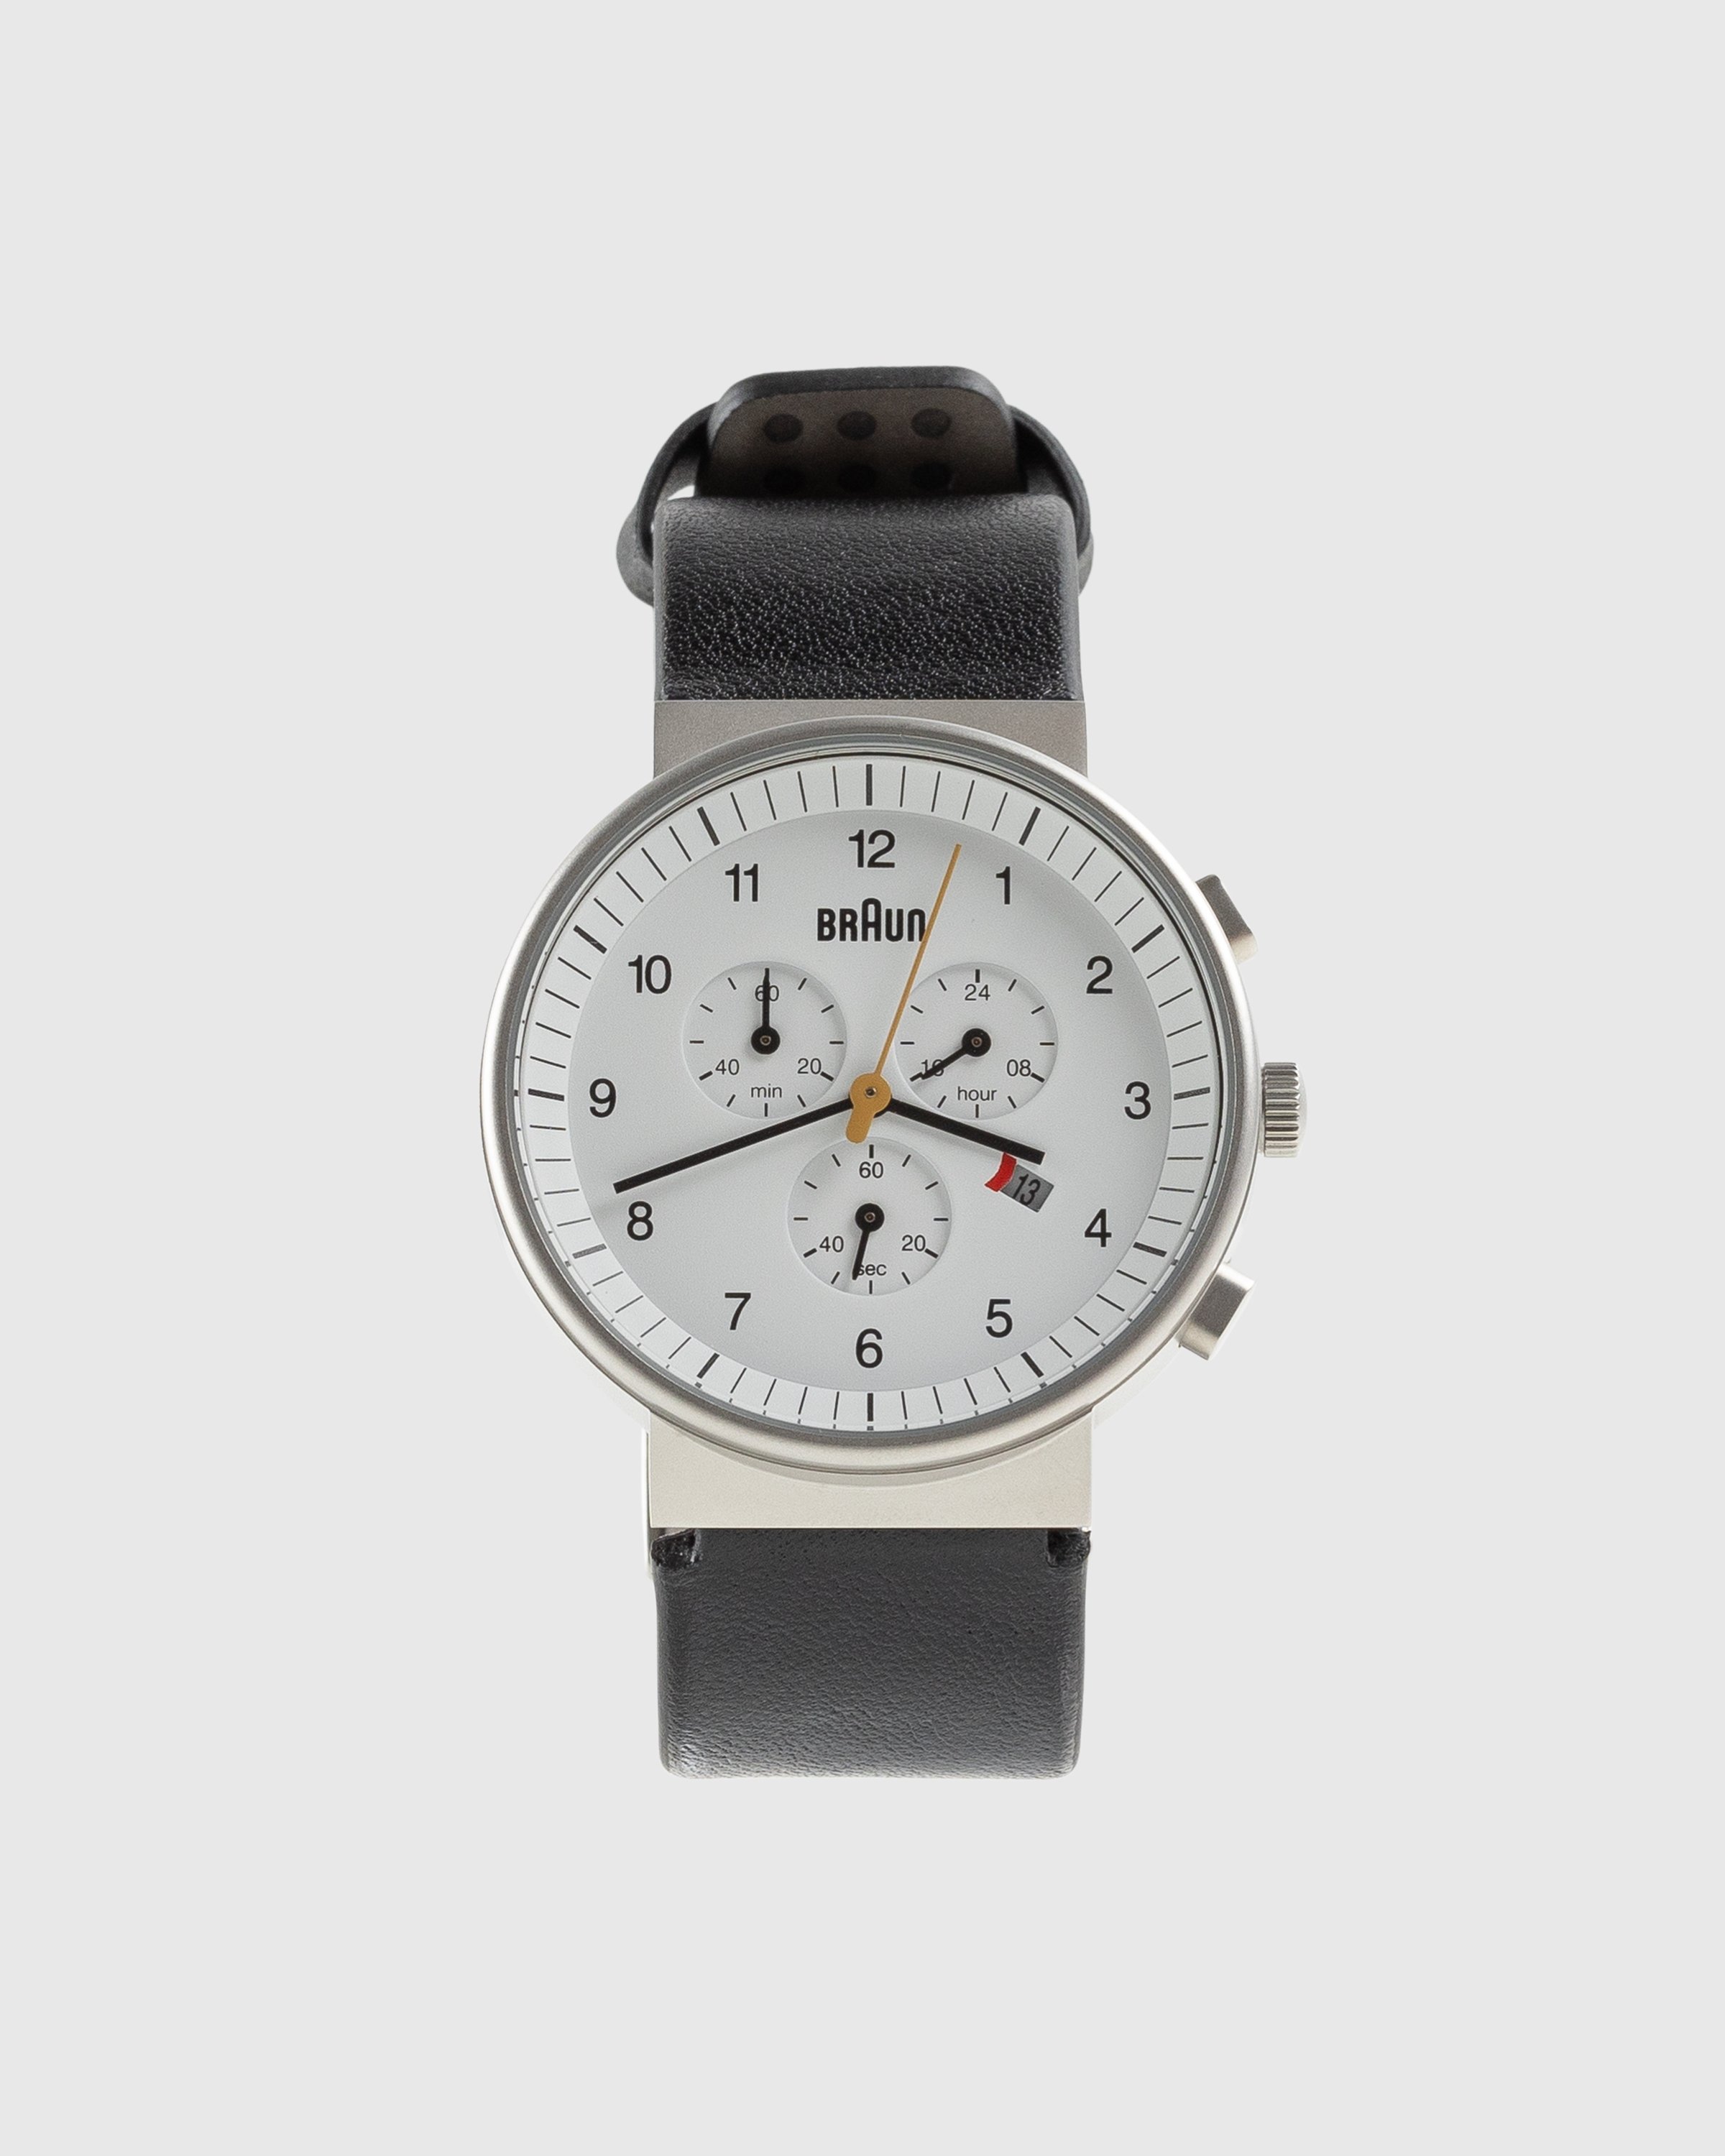 BRAUN - Gents BN0035 Classic Chronograph White Watch Black Leather Strap - Accessories - Black - Image 1